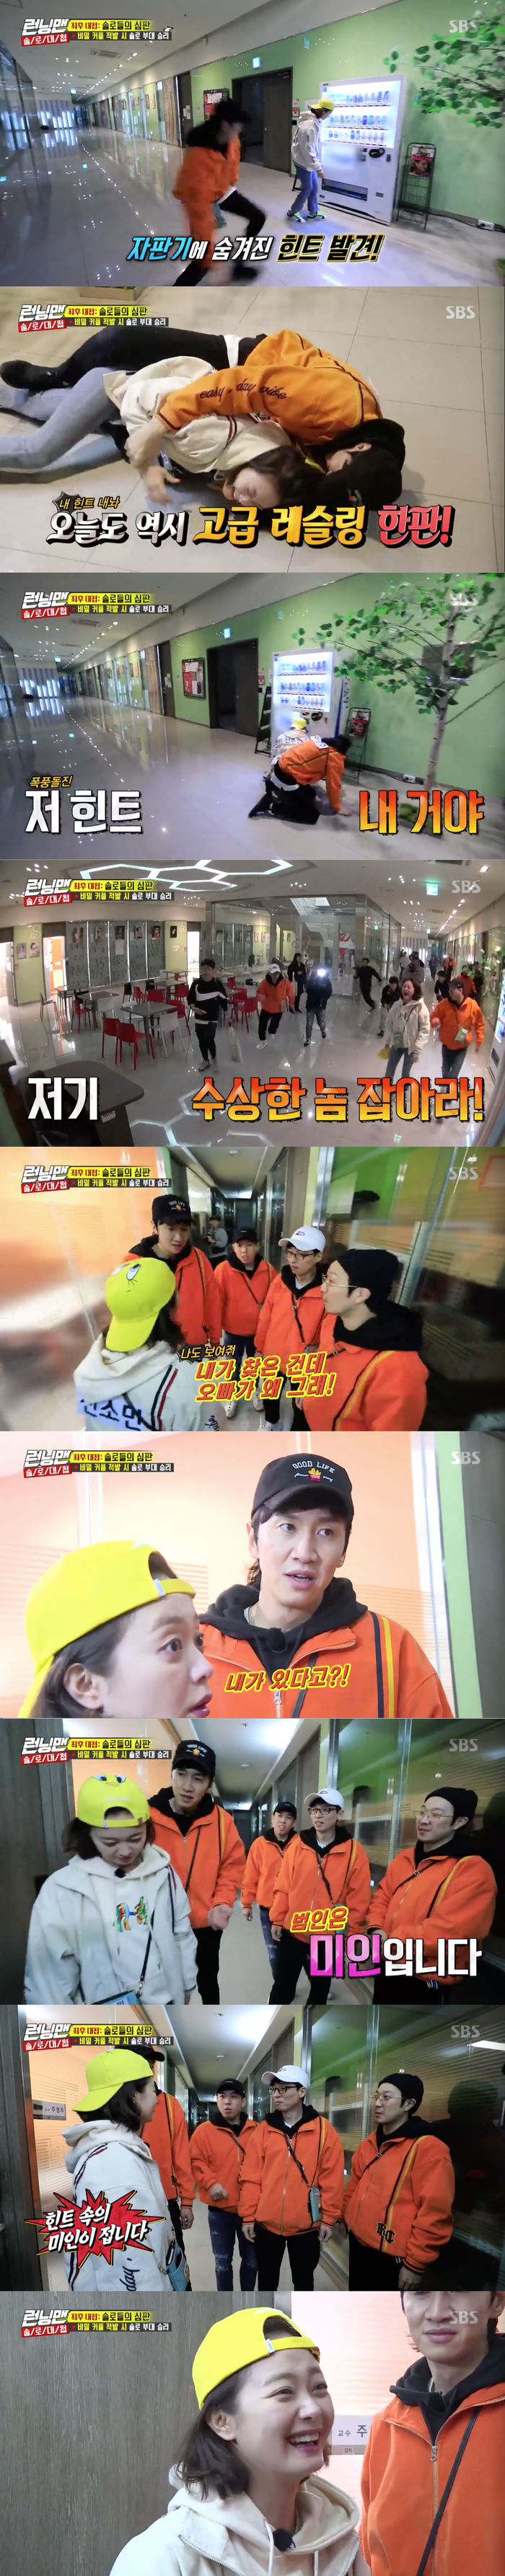 Lee Kwang-soo soo sweetened Jeon So-min in a single wordOn SBS Running Man broadcasted on the 7th, Race was held on the theme of solo confrontation.On the day of the broadcast, the members entered the final race Solos Judgement with suspicion of a secret couple.As the race began, Lee Kwang-soo ran into Jeon So-min, who suspected him of why were you with Jae-young? to Jeon So-min.So, Jeon So-min doubted each other, saying, I saw my brother and my sister whisper.At this point, Jeon So-min found a hint hidden in the vending machine; Lee Kwang-soo, who was by his side, ran in as Jeon So-min first got the hint.And Lee Kwang-soo stole a hint from Jeon So-min and ran away.Lee Kwang-soo then confirmed the hint, and Yoo Jae-seok and Yang Se-chan, who saw the scene, shared a hint: The fact that the woman is in her 30s among the secret couples.Bona was excluded from the secret couple.A short time later, Jeon So-min appeared, who told Lee Kwang-soo: Its a hint I found, but my brother took it and ripped it apart.Give me a hint, too, but Lee Kwang-soo refused, you cant tell me in the answer.Then, Jeon So-min said, Its too much. So Lee Kwang-soo said, The perpetrator was a hint of beauty, so I could not tell you.Jeon So-min said, Thats me then, and quickly brightened his face; then Jeon So-min nudged the members, Im the beauty in the hint.Haha then responded, I feel sorry for you, and laughed.